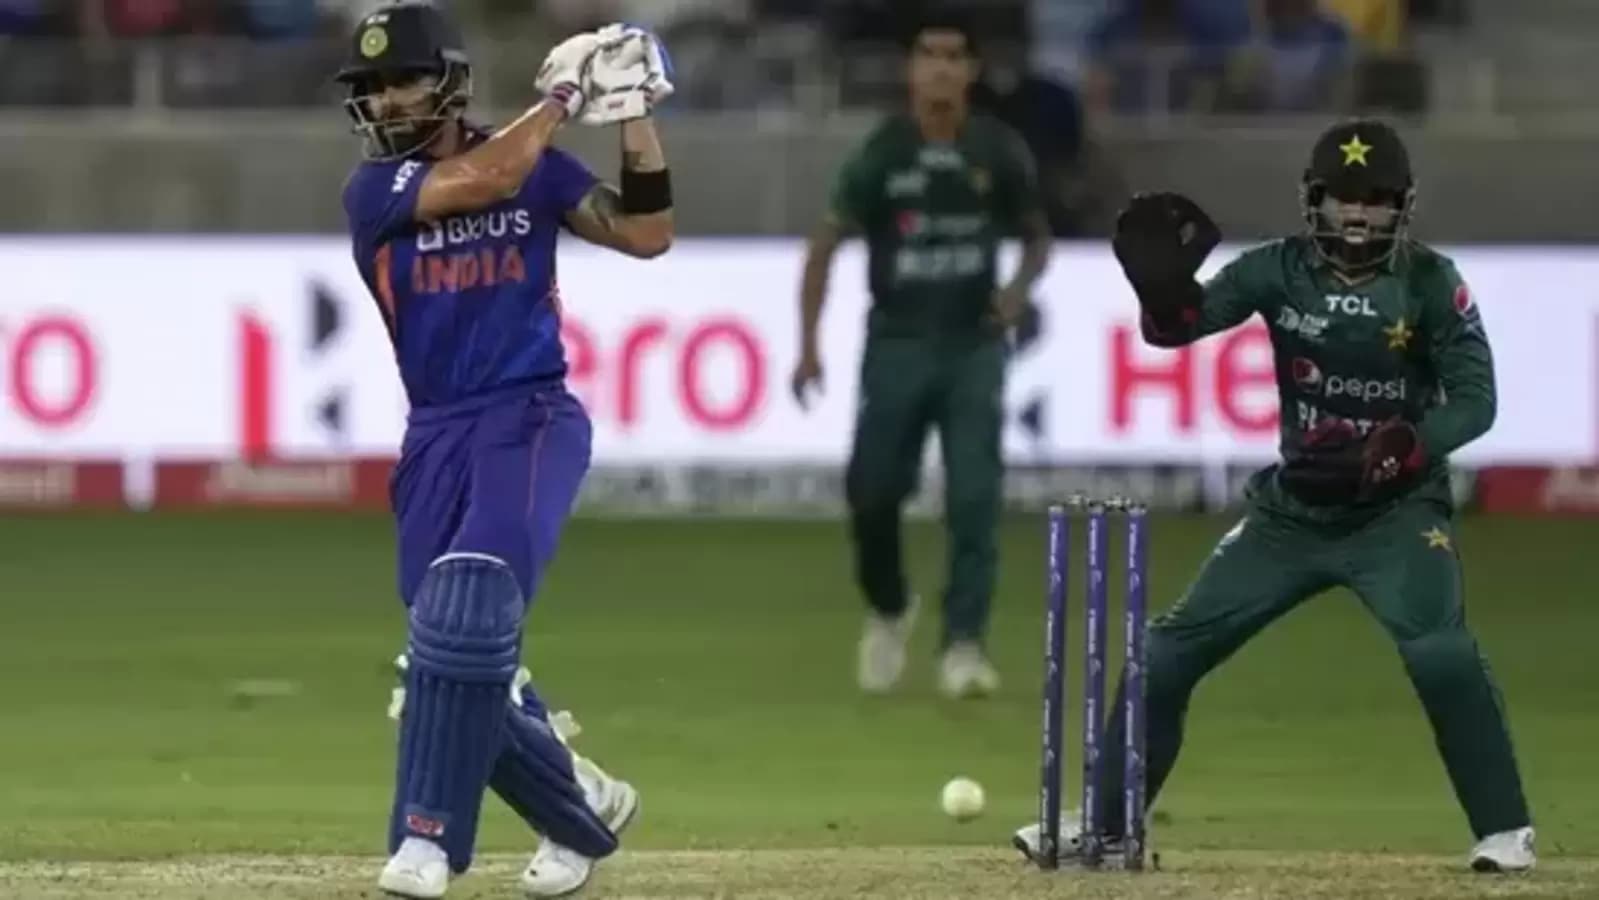 IND vs PAK LIVE Cricket Score Streaming Update How to watch Thrilling T20 match online How-to